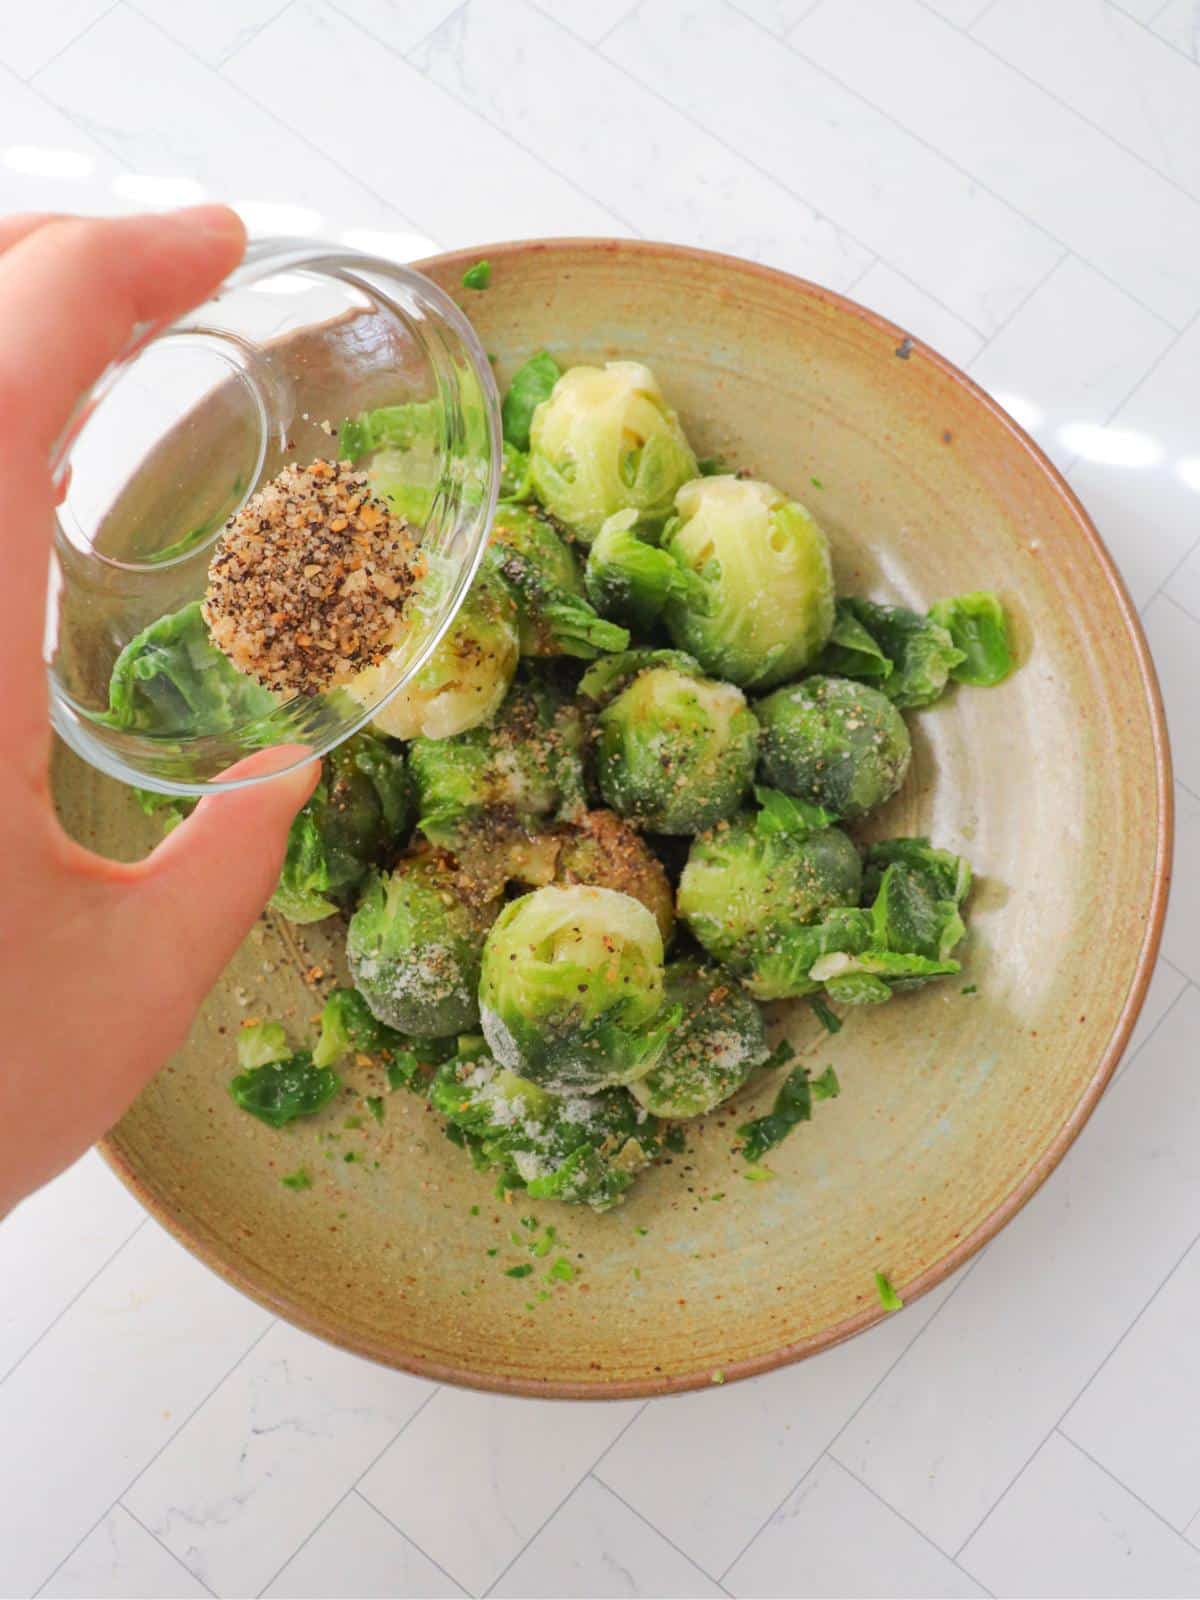 A hand sprinkling seasonings onto frozen brussels sprouts in a brown ceramic bowl.